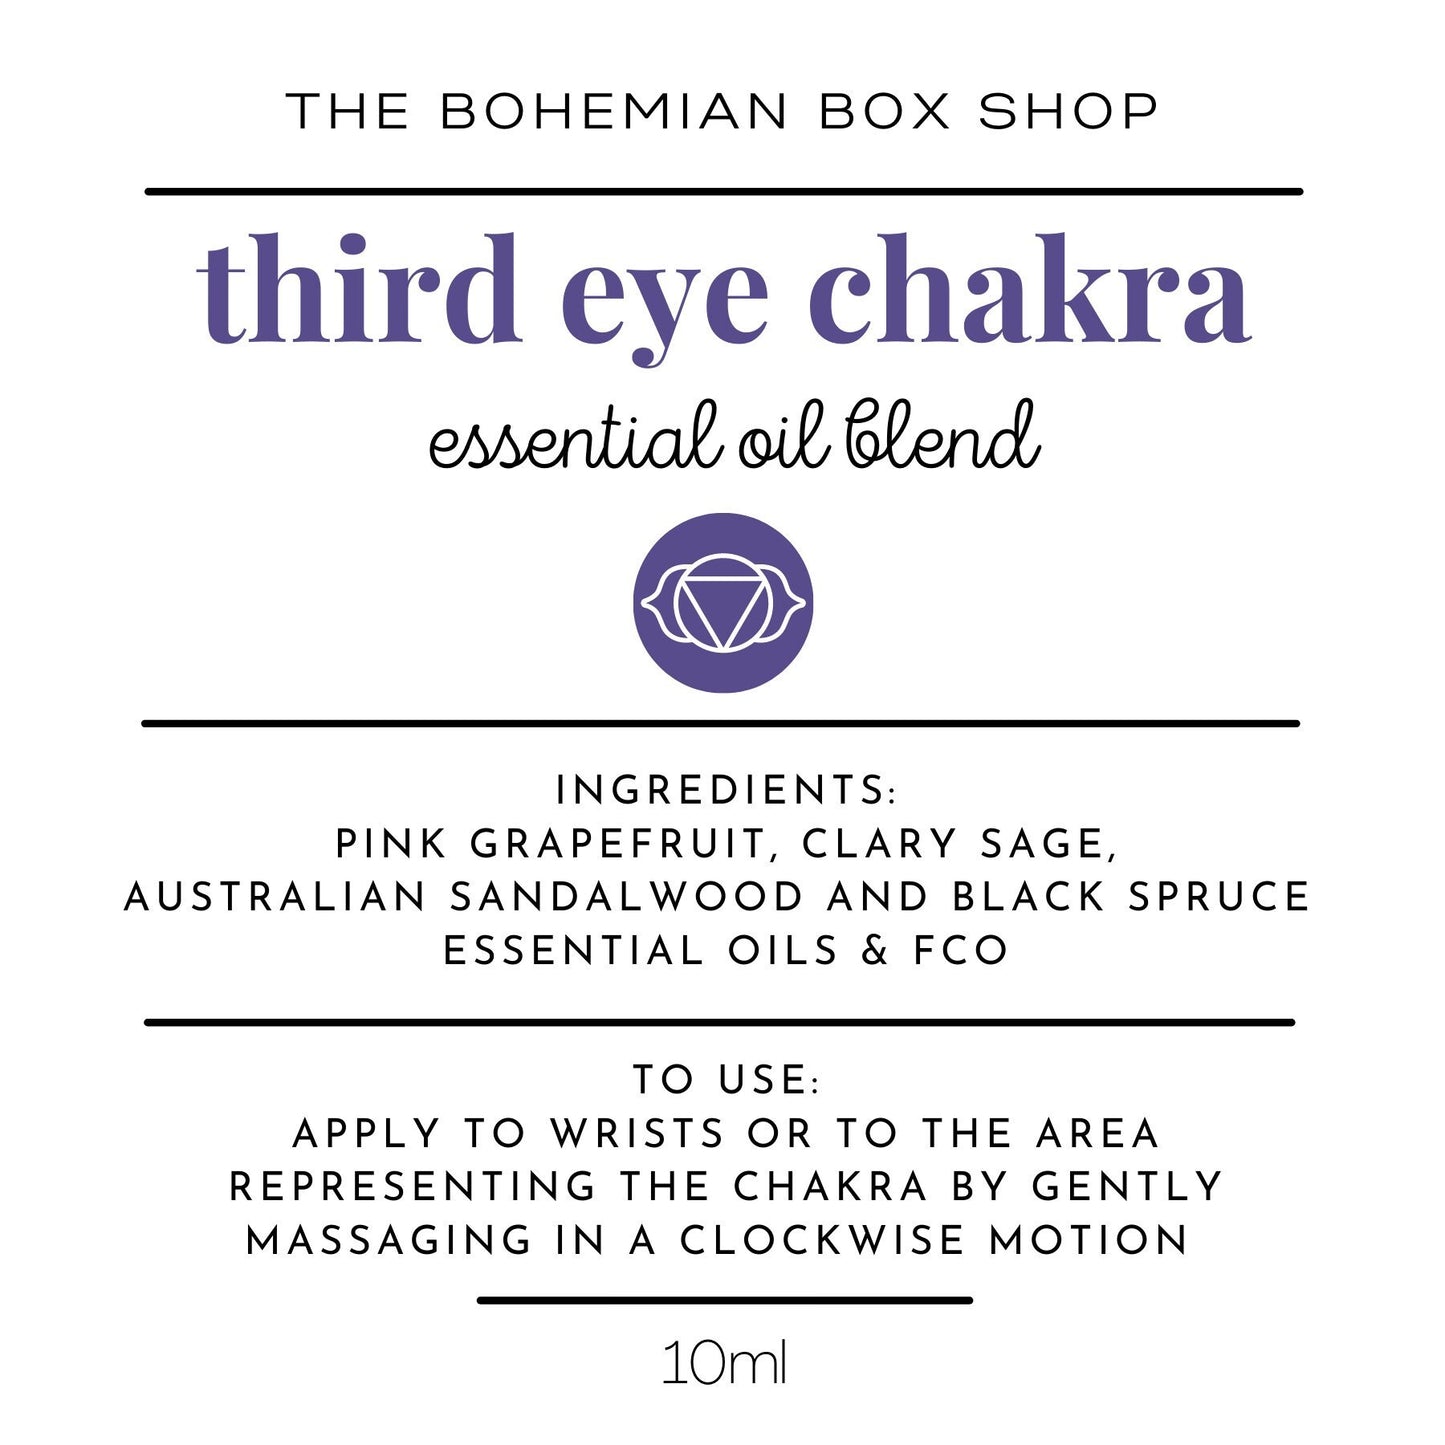 Third eye chakra essential oil blend ingredients and directions for use 